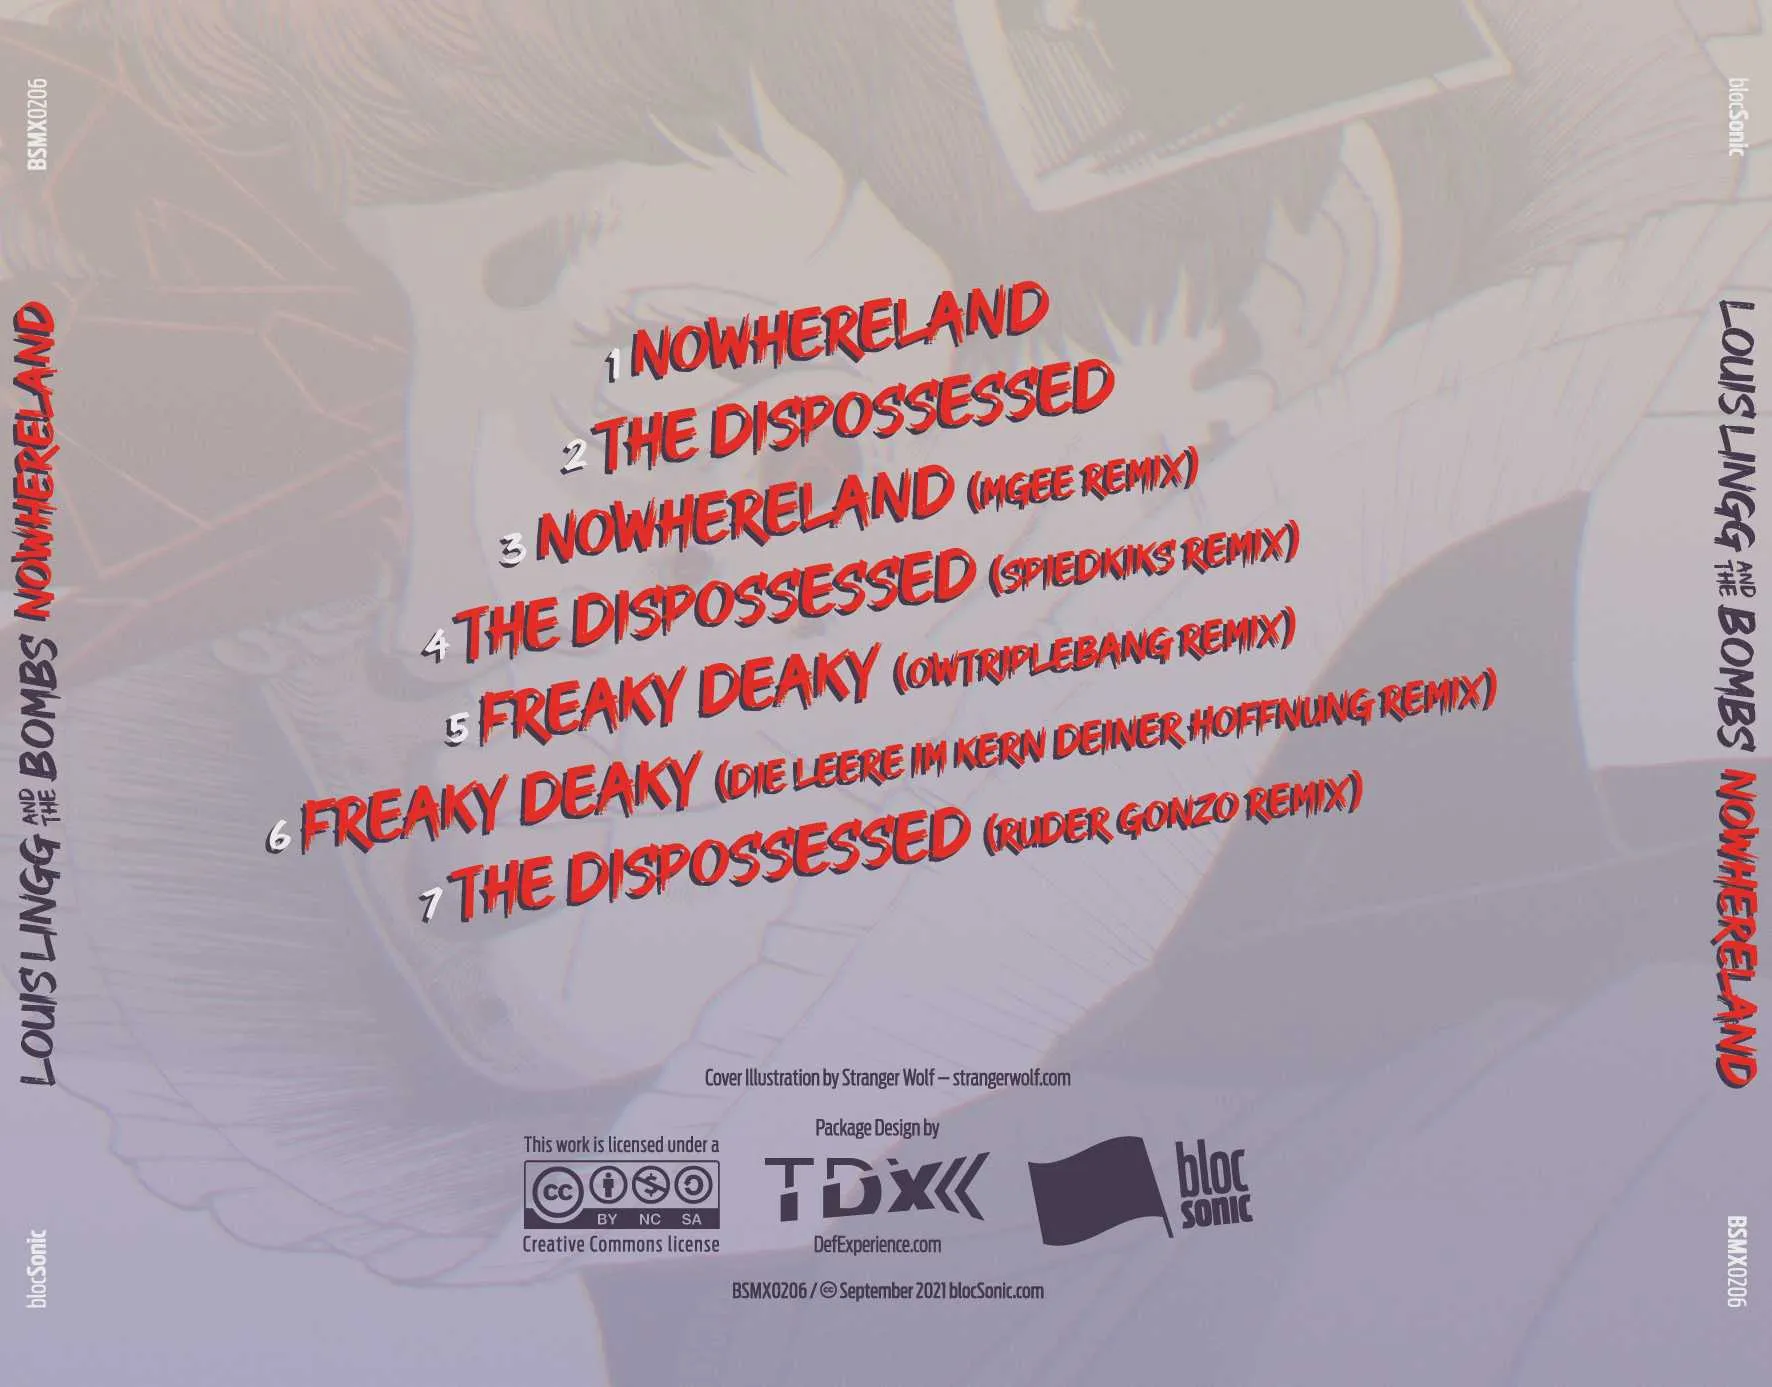 Album traycard for “Nowhereland” by Louis Lingg and The Bombs